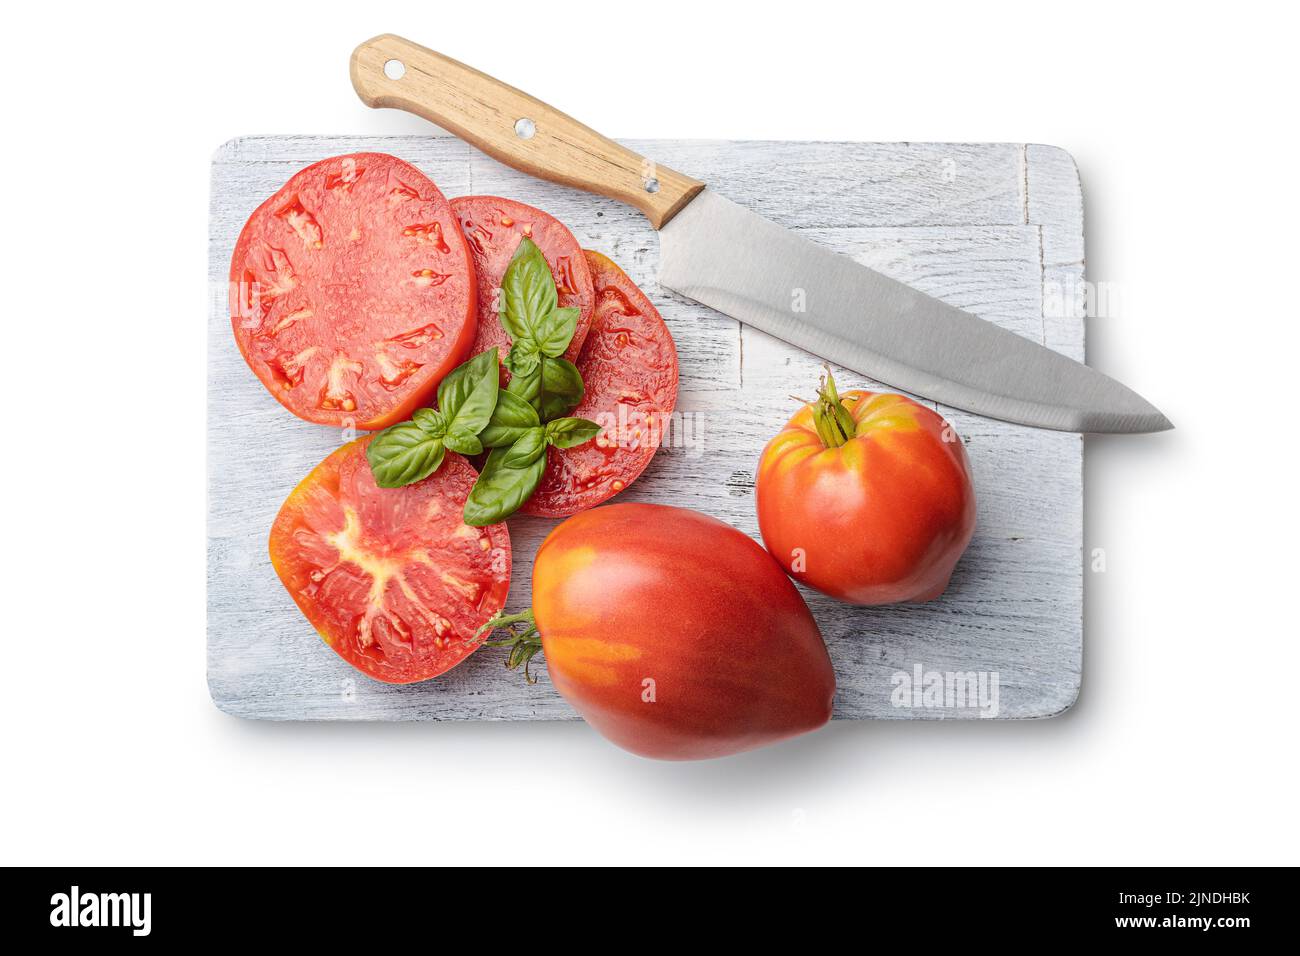 Sliced bull heart tomatoes on cutting board isolated on a white background. Stock Photo